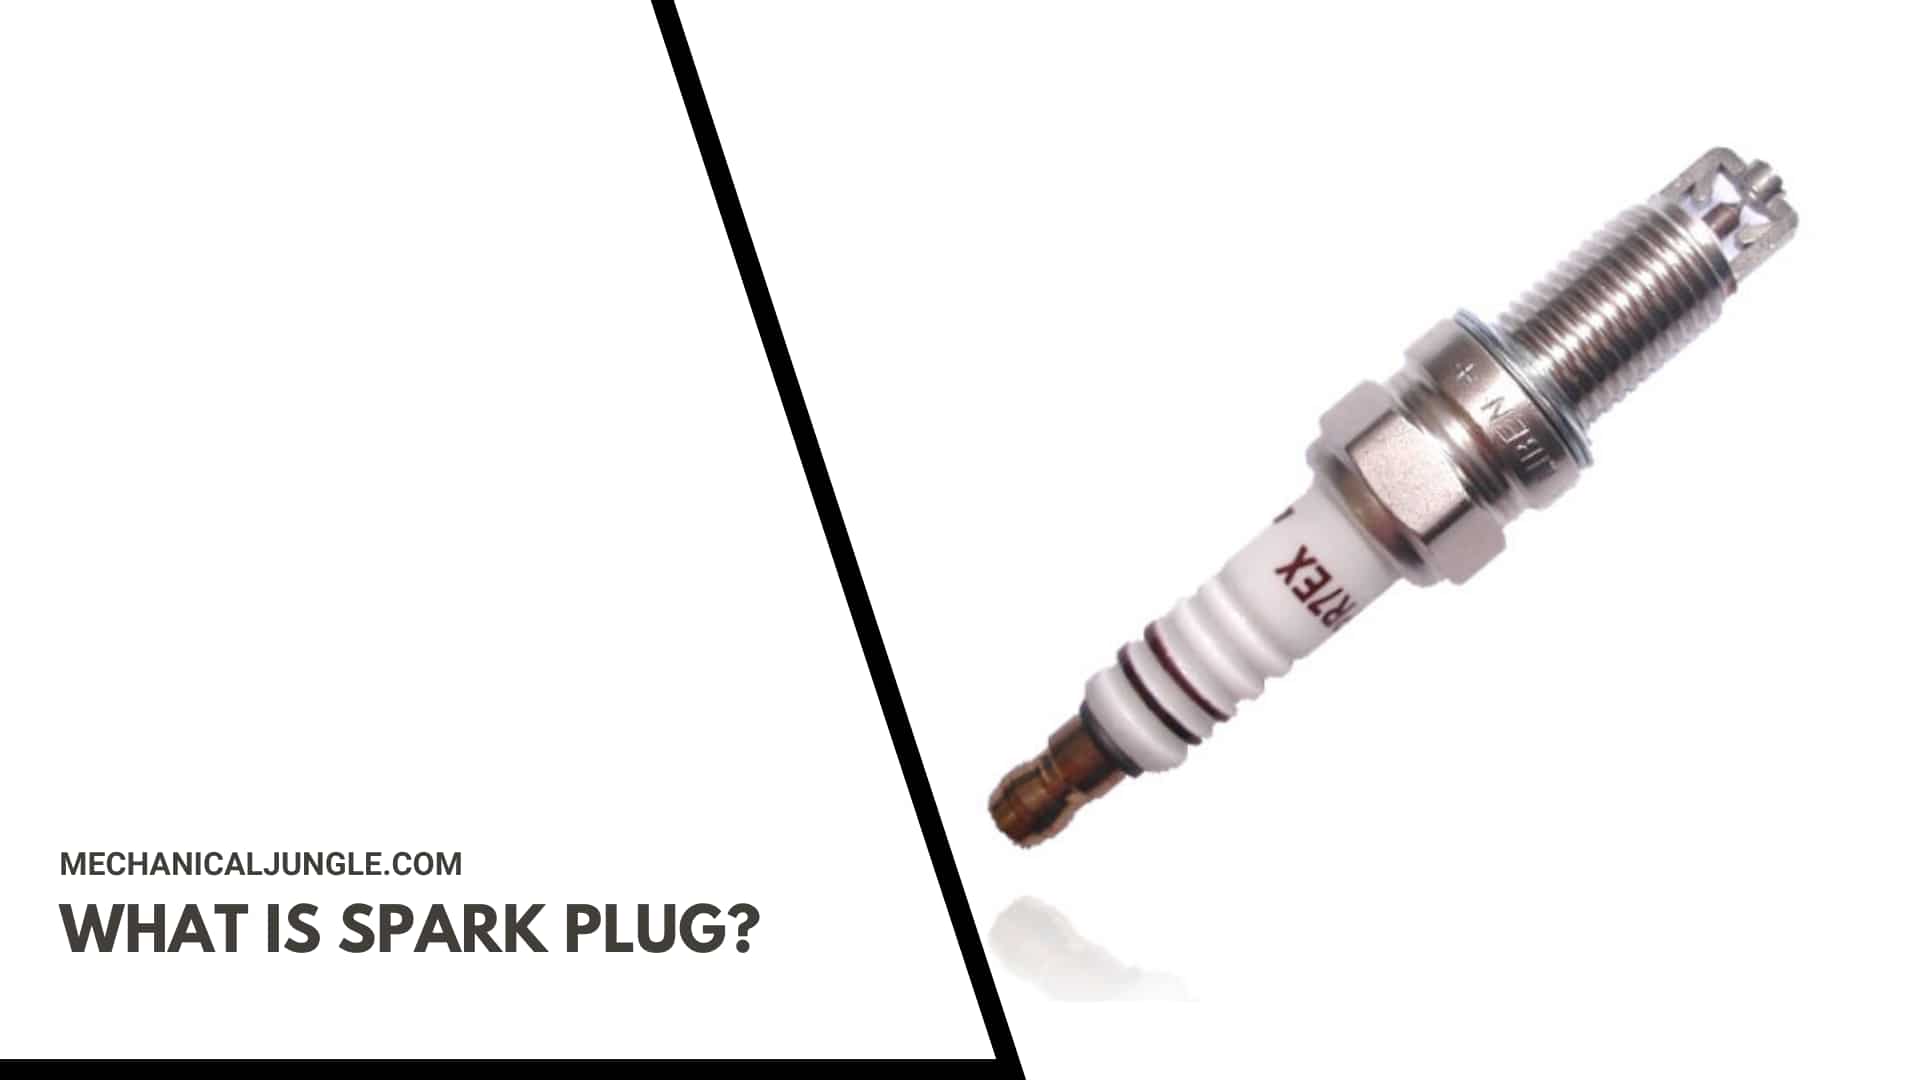 What Is Spark Plug?